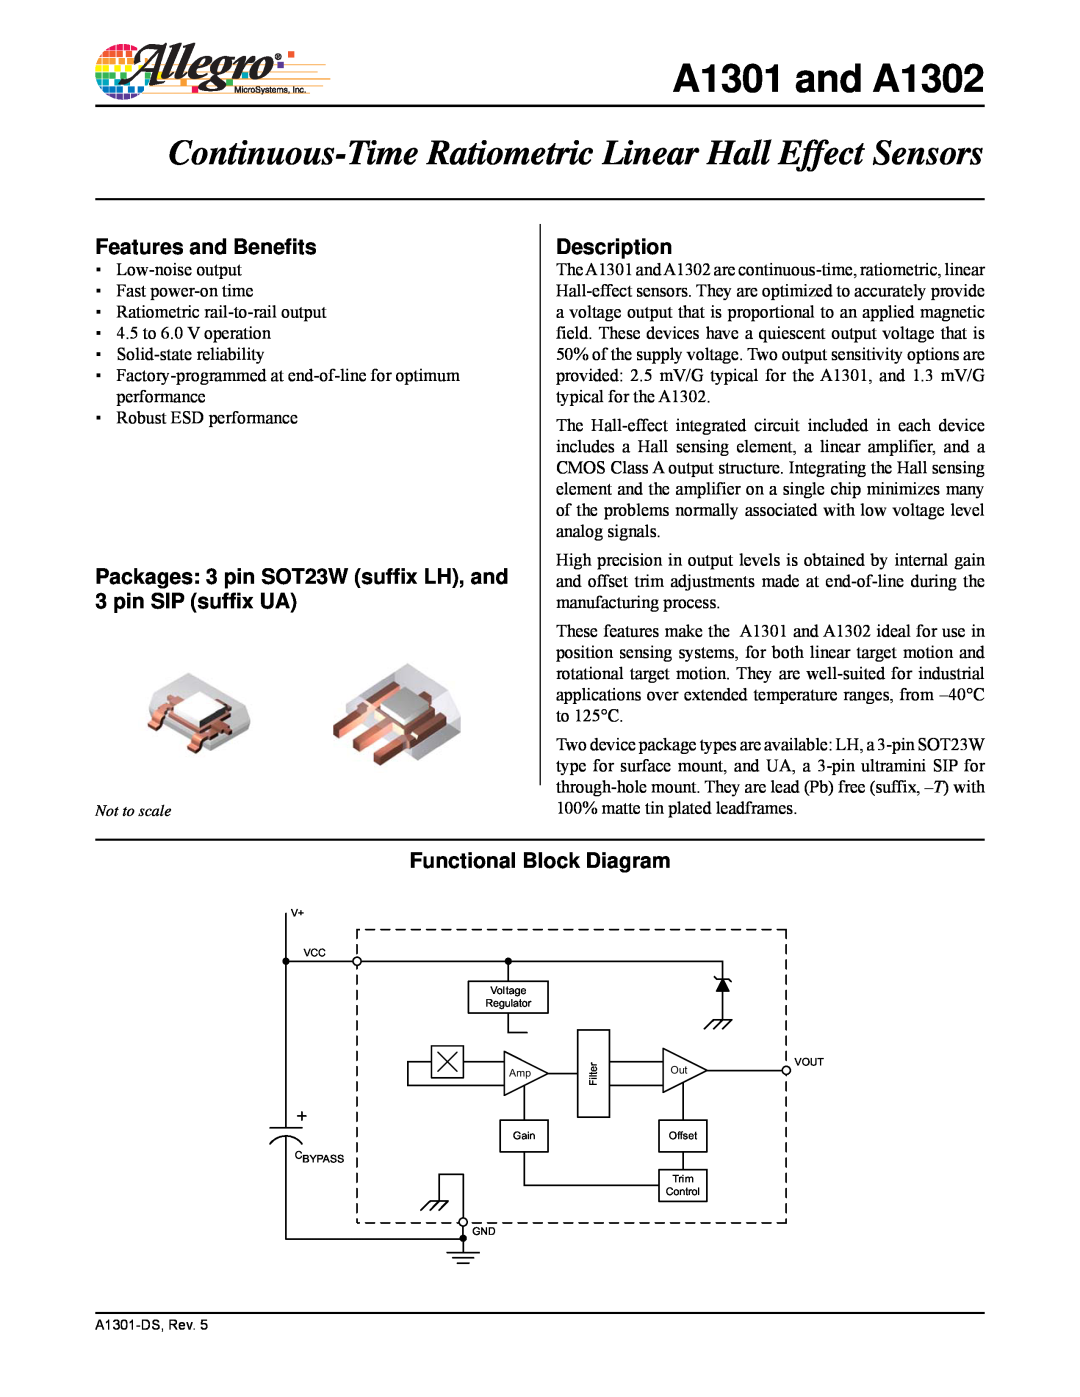 Allegro Multimedia manual A1301 and A1302, Continuous-Time Ratiometric Linear Hall Effect Sensors, Description 